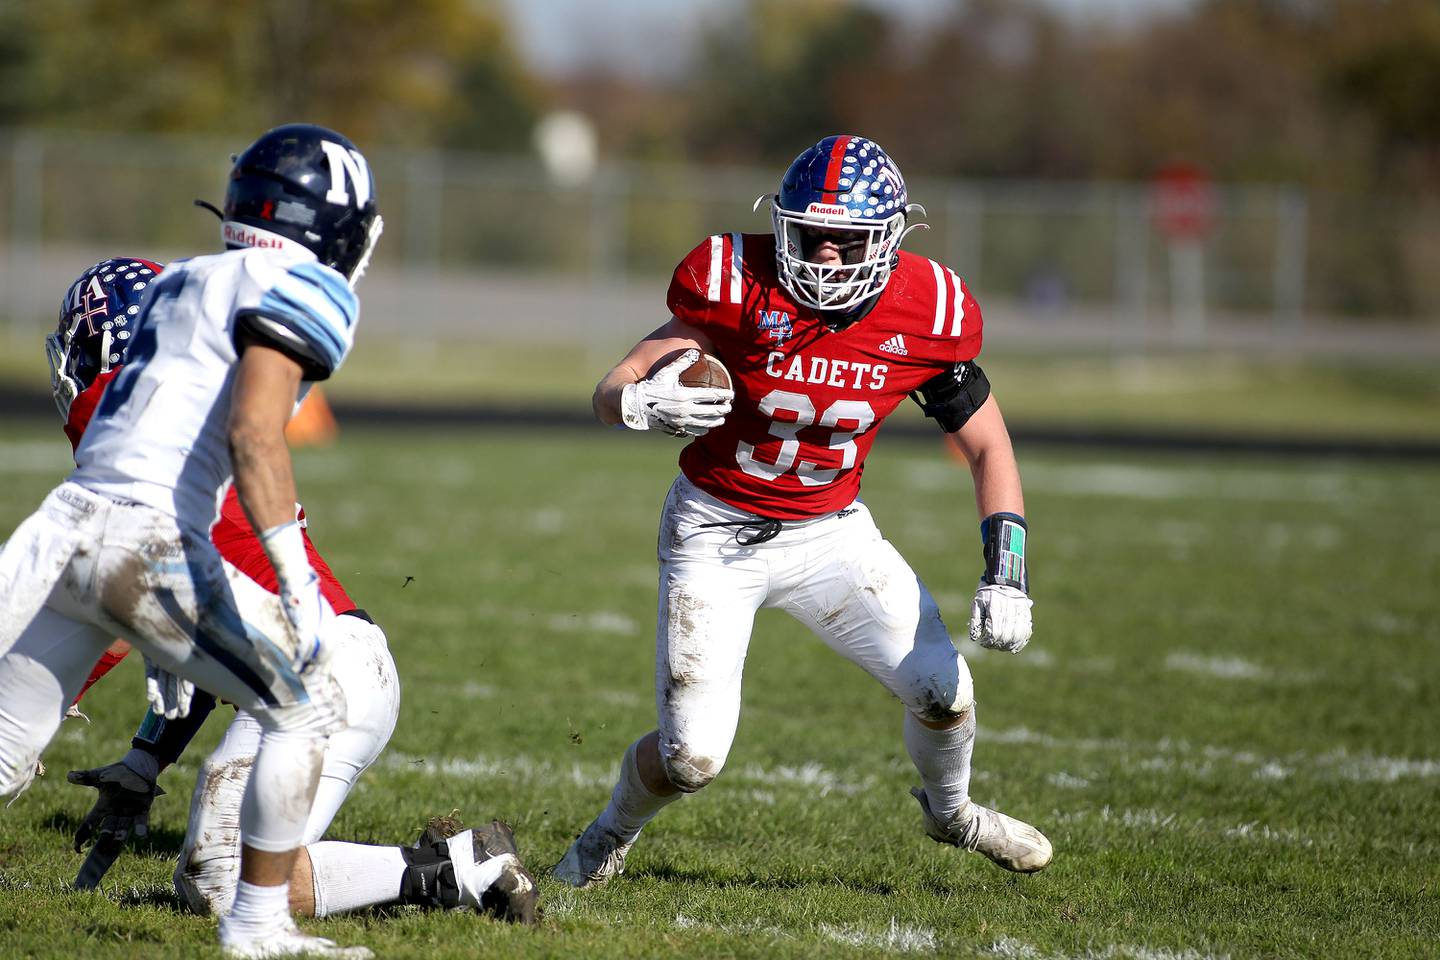 Marmion's Jacob Bottarini (33) carries the ball during a Class 5A second-round game against Nazareth Academy in Aurora on Saturday, Nov. 6, 2021.